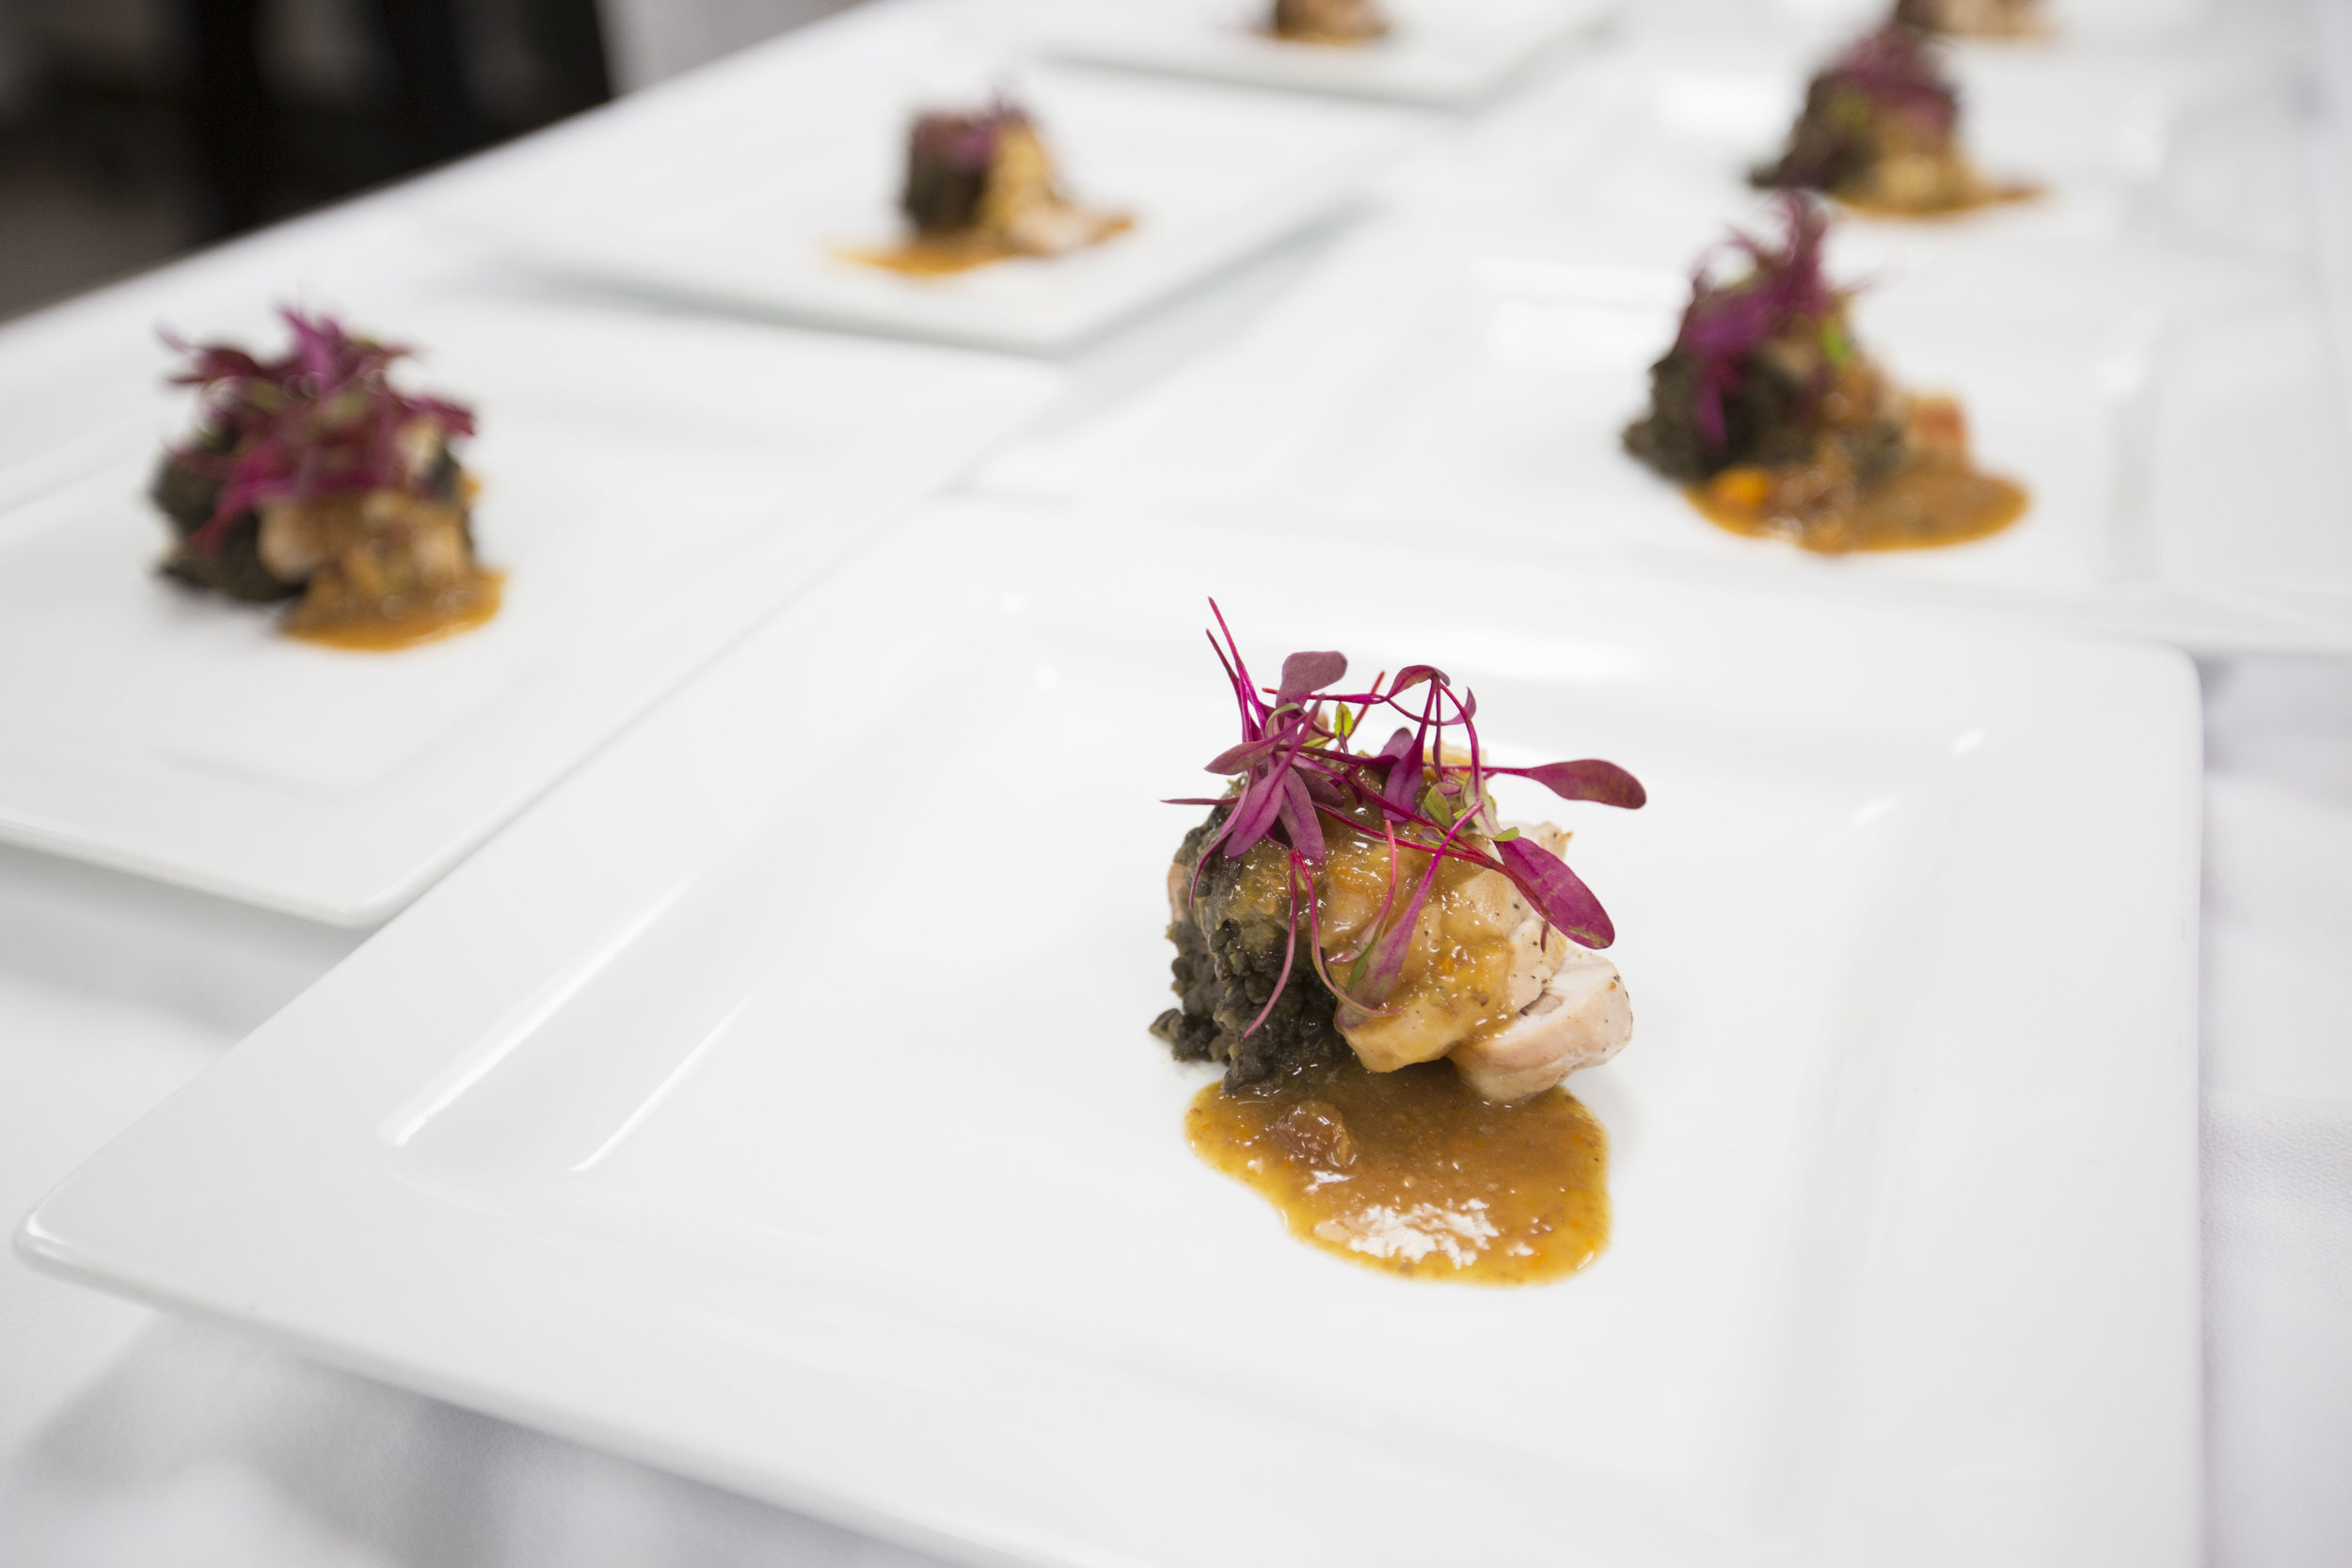  Roasted rabbit loin with smoked chorizo, lentils and sauteed carrots and cherry sauce prepared by Chef Keith A. Huffman and Chef Daniel Cleary &nbsp;on March 19, 2016 in Madison, Wisconsin.&nbsp; 